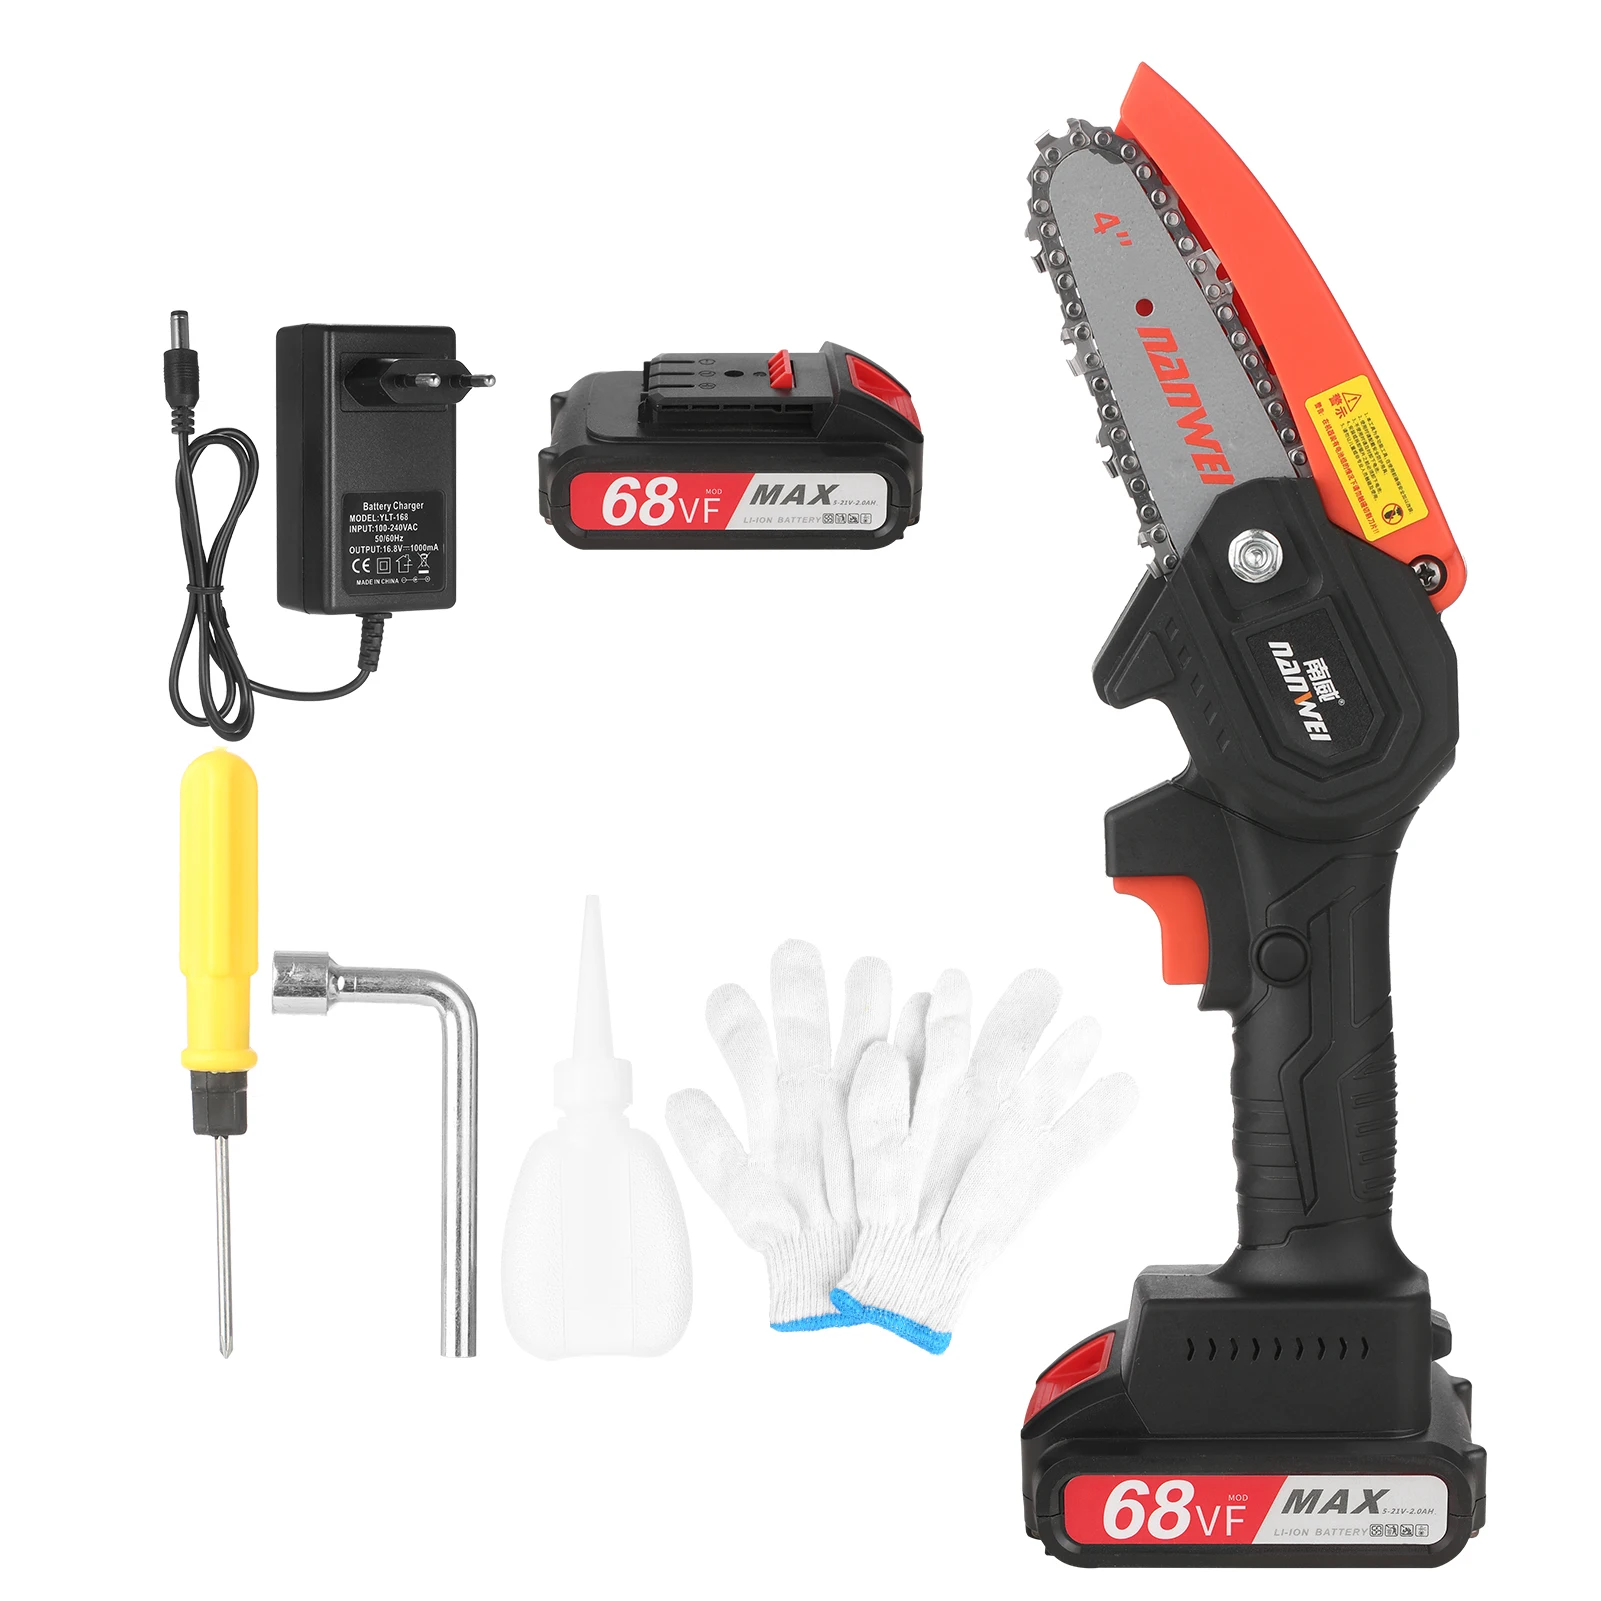 

21V Mini Cordless Chainsaw Electric Brushless Pruning Saw Tree Branch Pruner Pruning Shears Garden Tool Trimming Wood Cutting